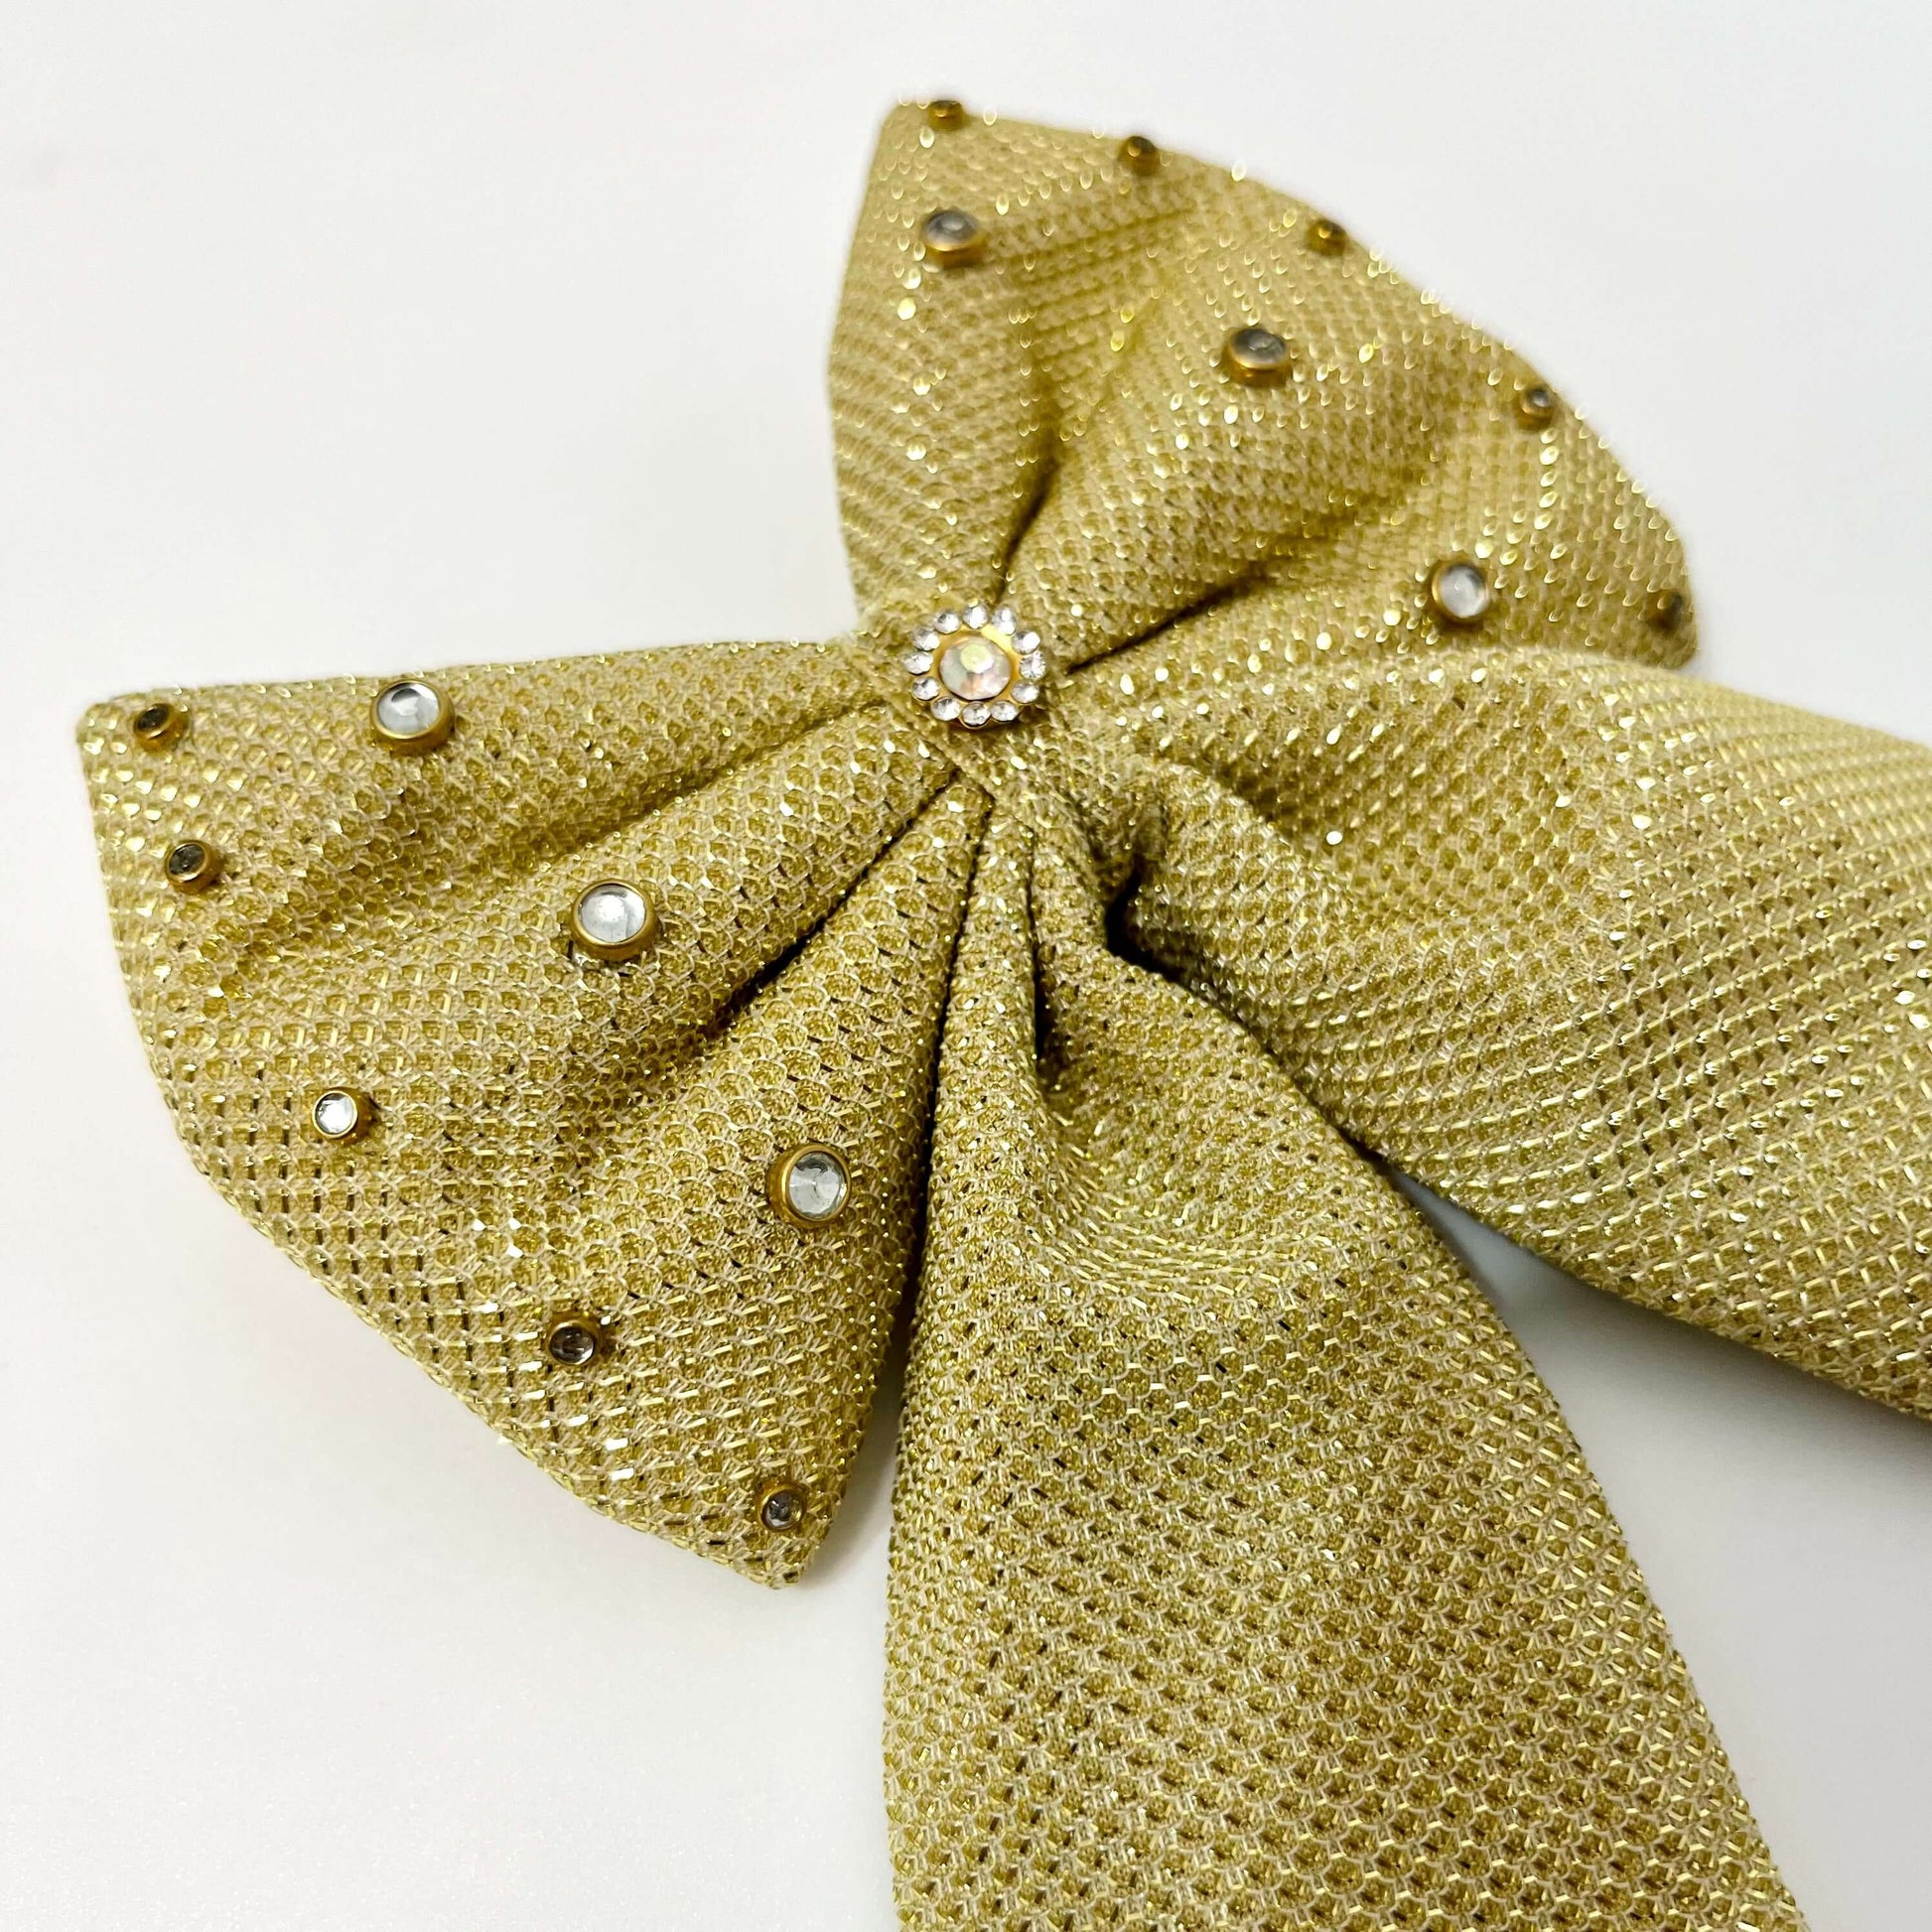 Golden Embellished Pigtail Hair Bow Clip | Designer Hair Accessory